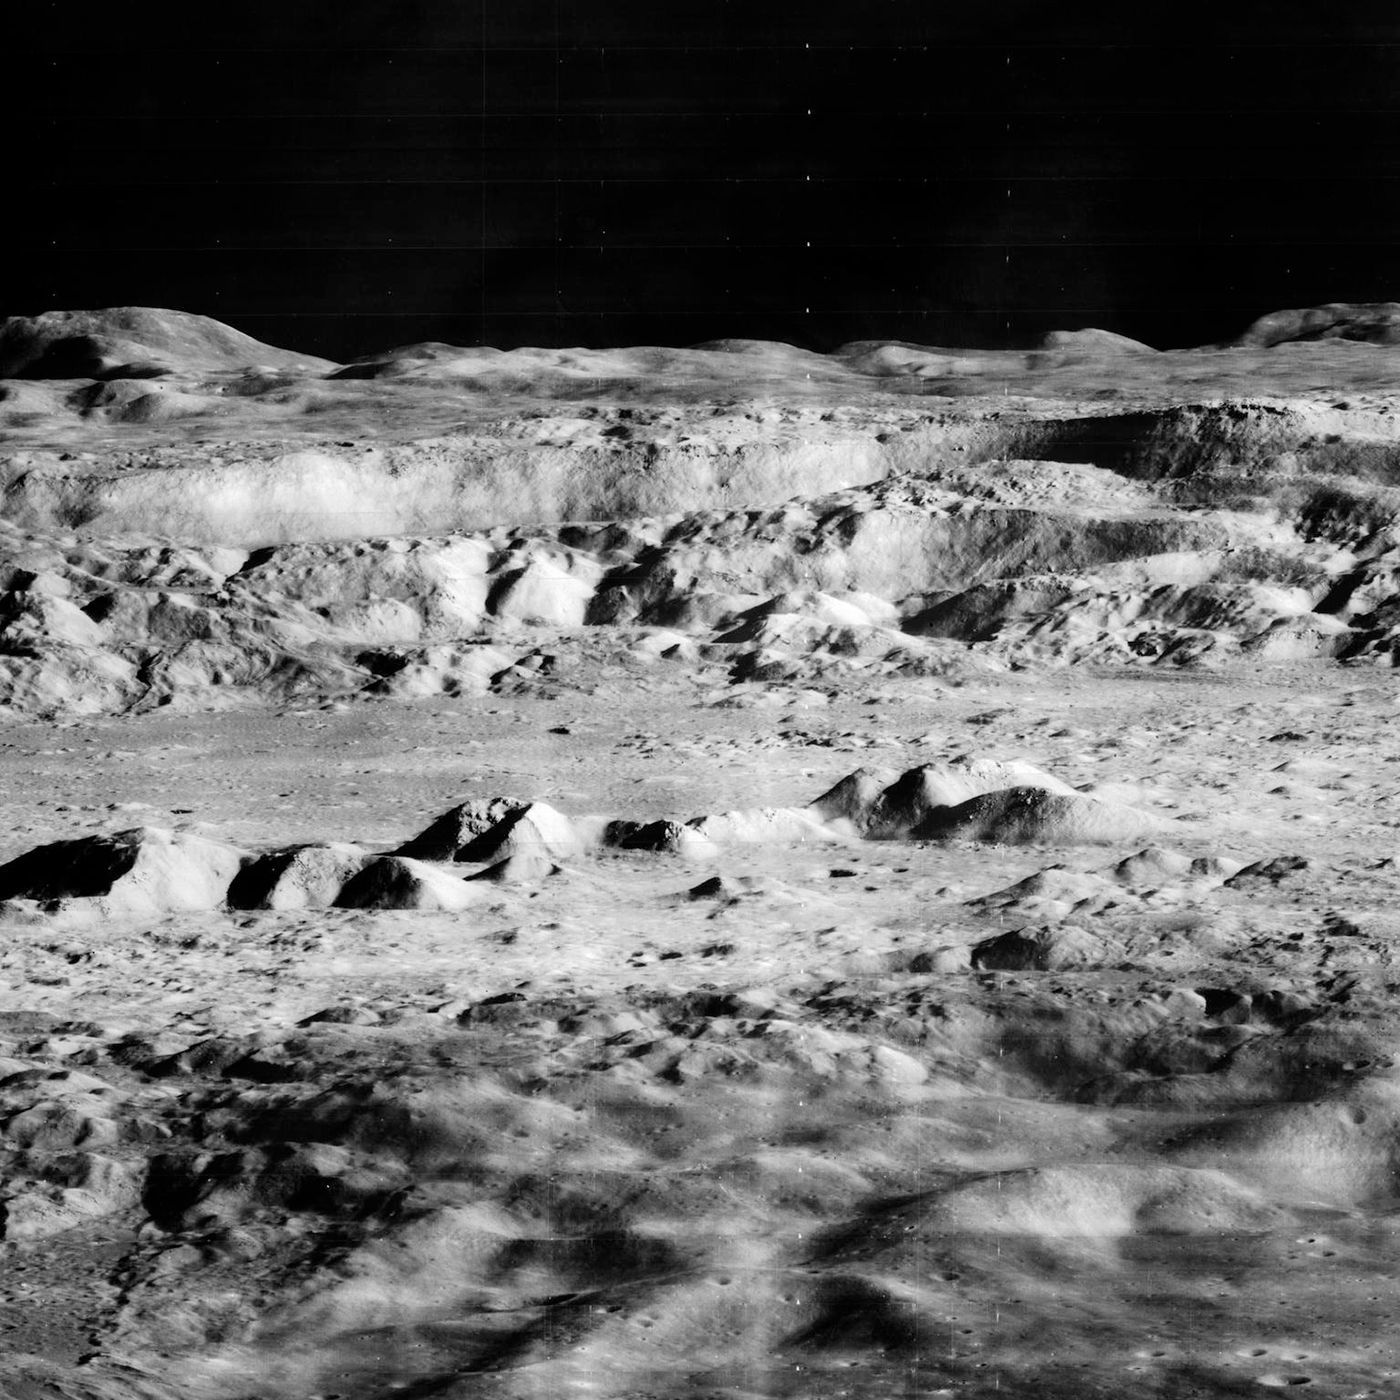 Space Policy Edition: The power of the lunar sublime